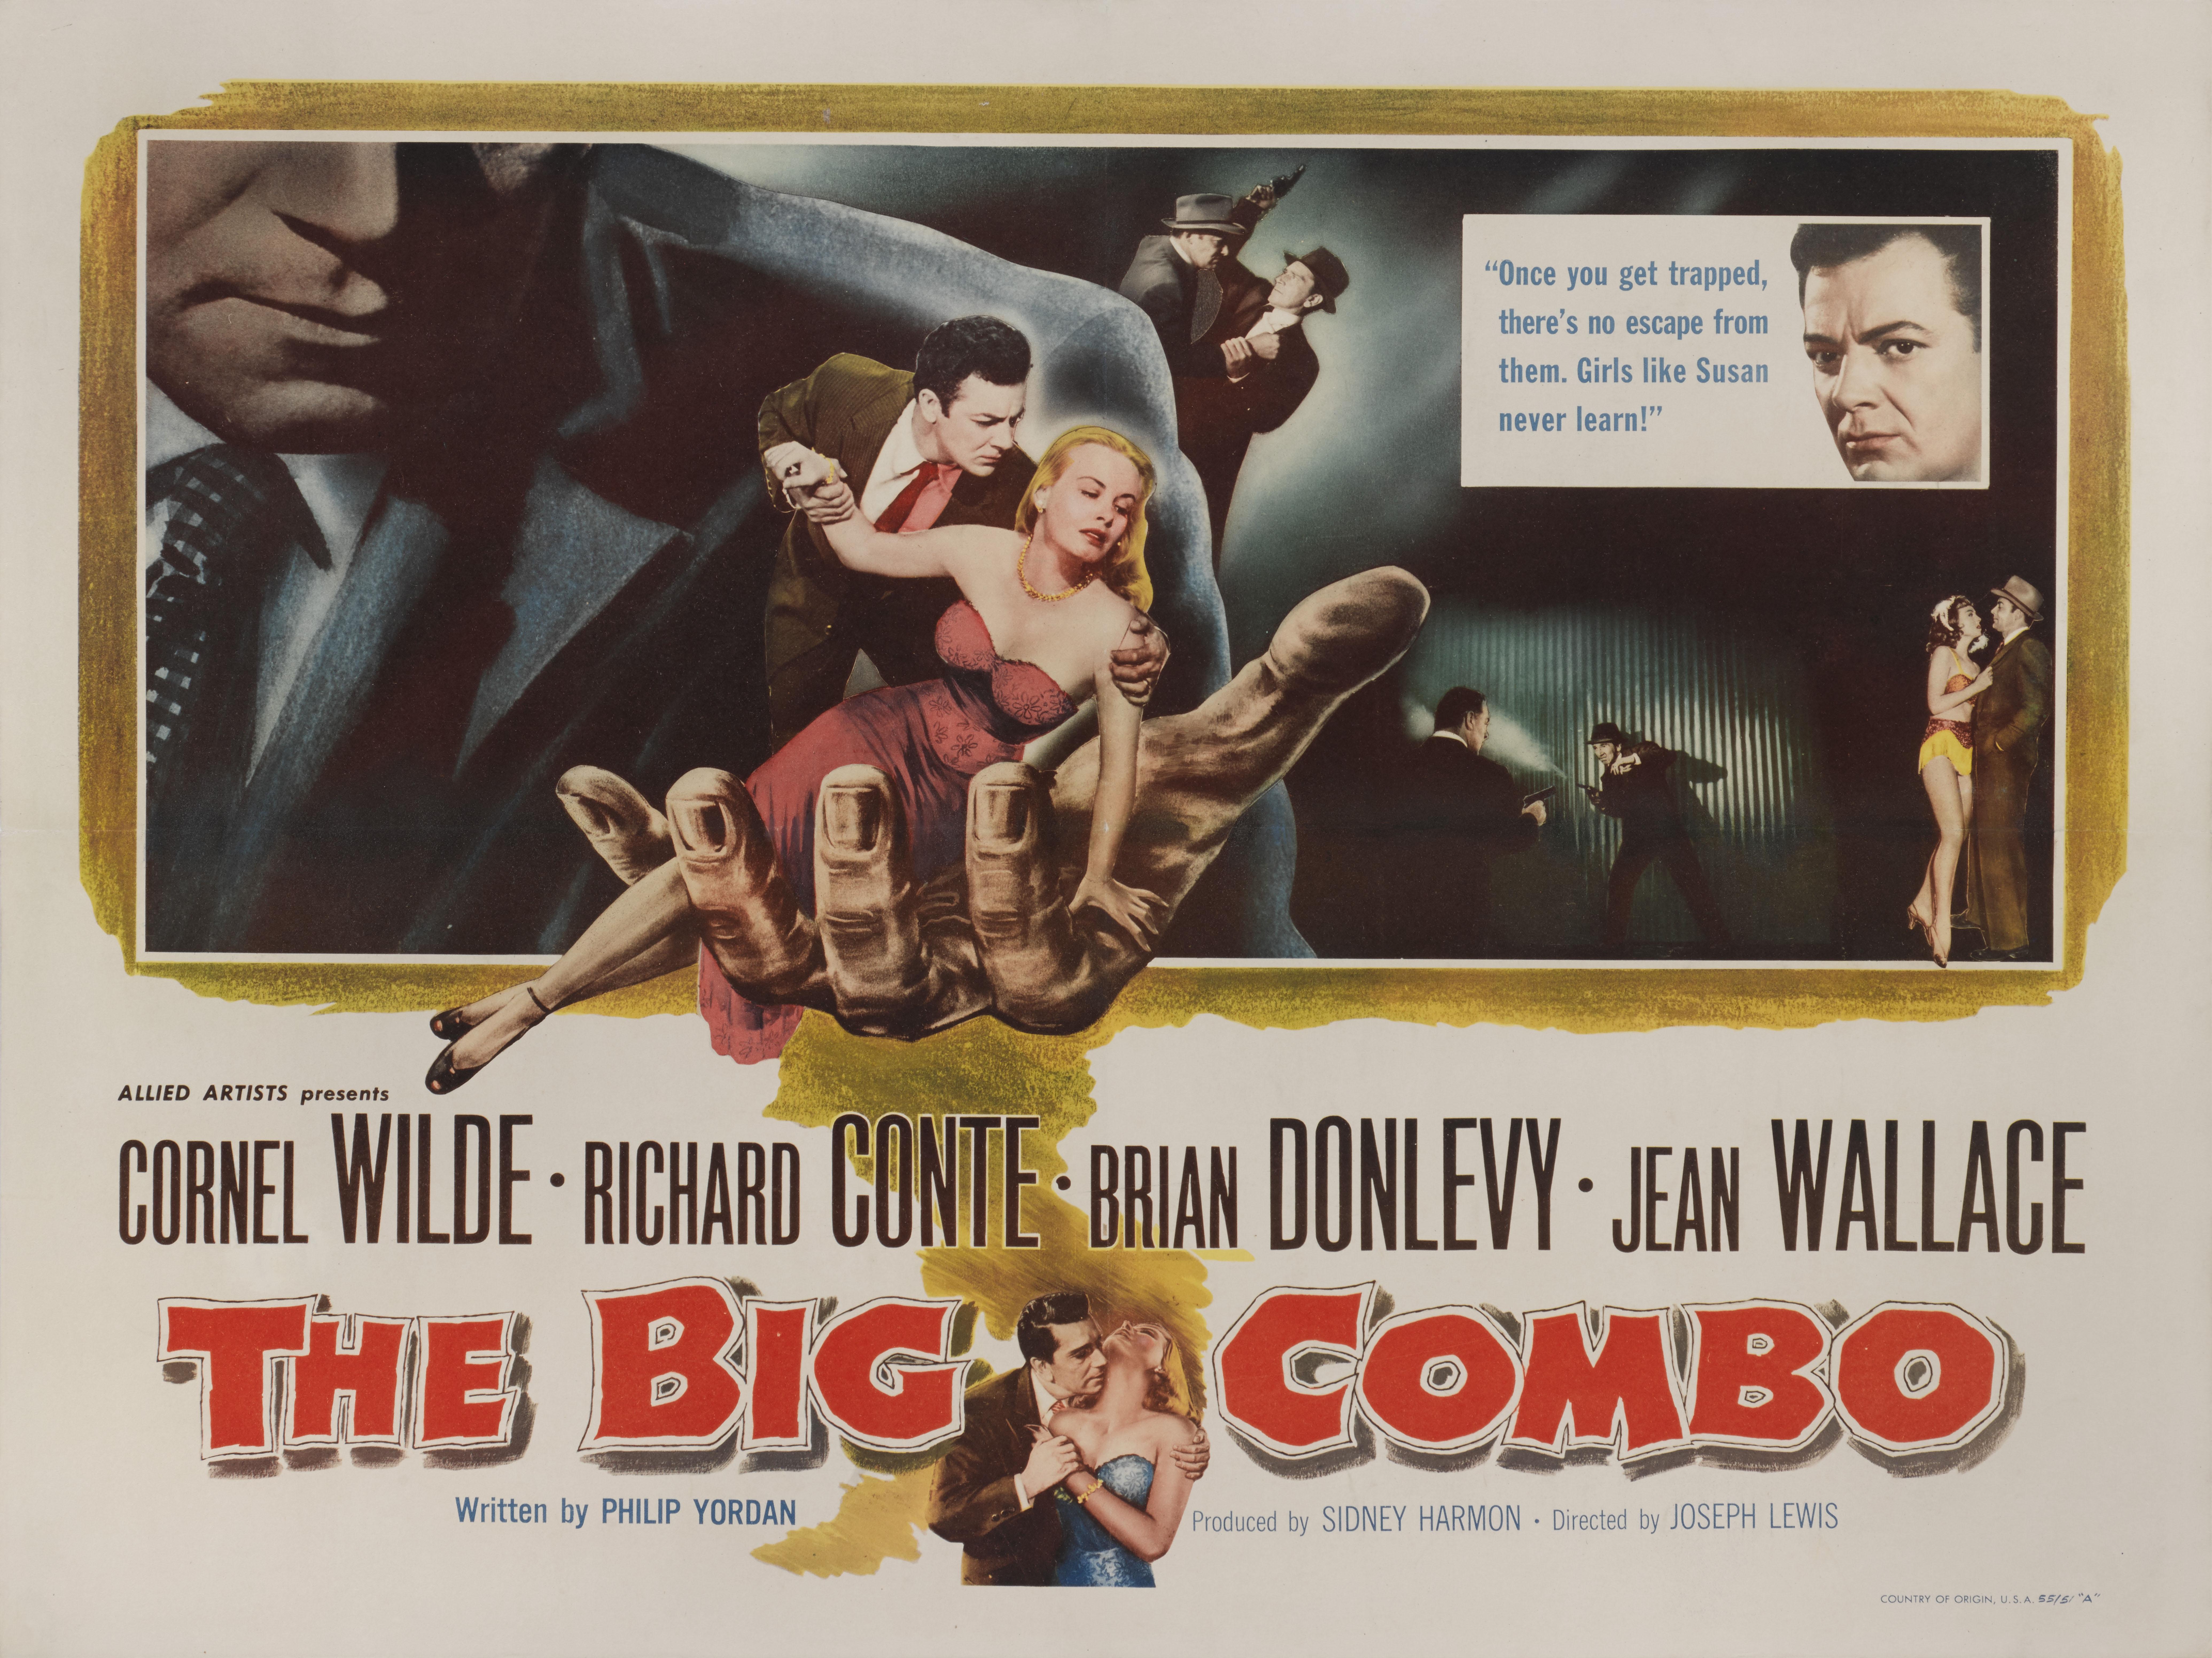 Original US style B film poster for the 1955 Film Noir starring Cornel Wilde, Richard Conte and Jean Wallace. This film was directed by Joseph H. Lewis.
This poster is unfolded and conservation paper backed, It would be shipped flat and sent out by